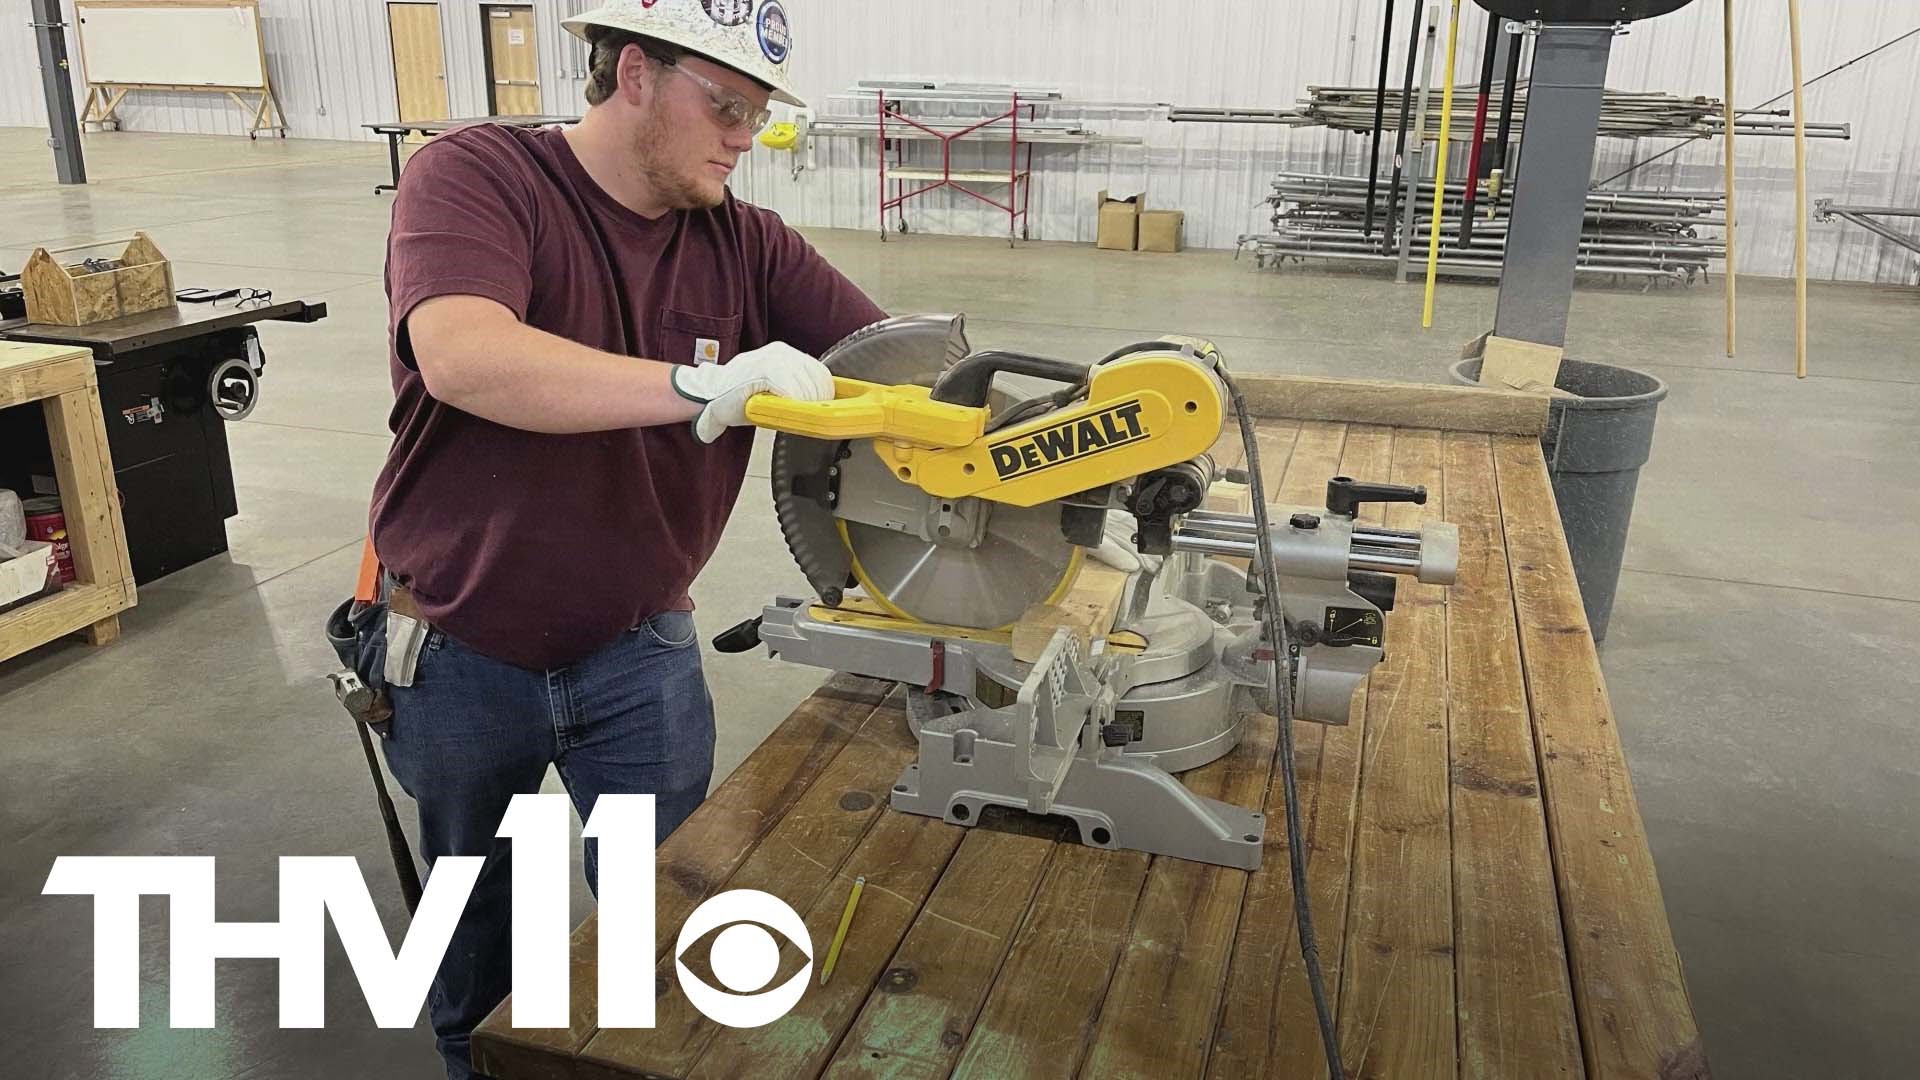 A new training facility is set to open today in Russellville, giving apprentices the opportunity to learn a new skill in carpentry and millwrighting.